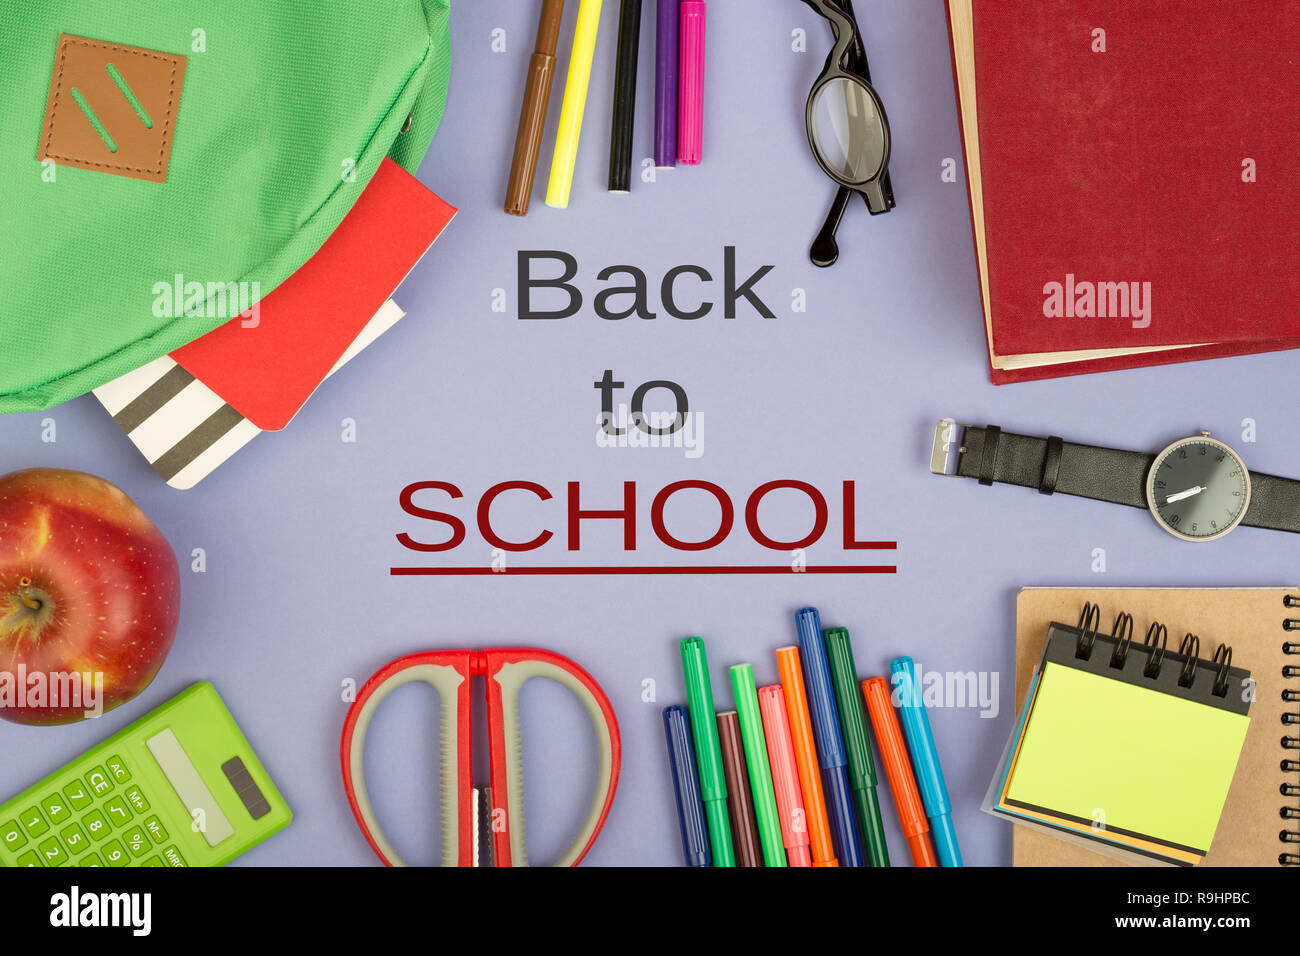 Backpack and school supplies: notepad, felt-tip pens, eyeglasses, scissors, calculator, book, watch on blue paper background with text 'Back to school Stock Photo